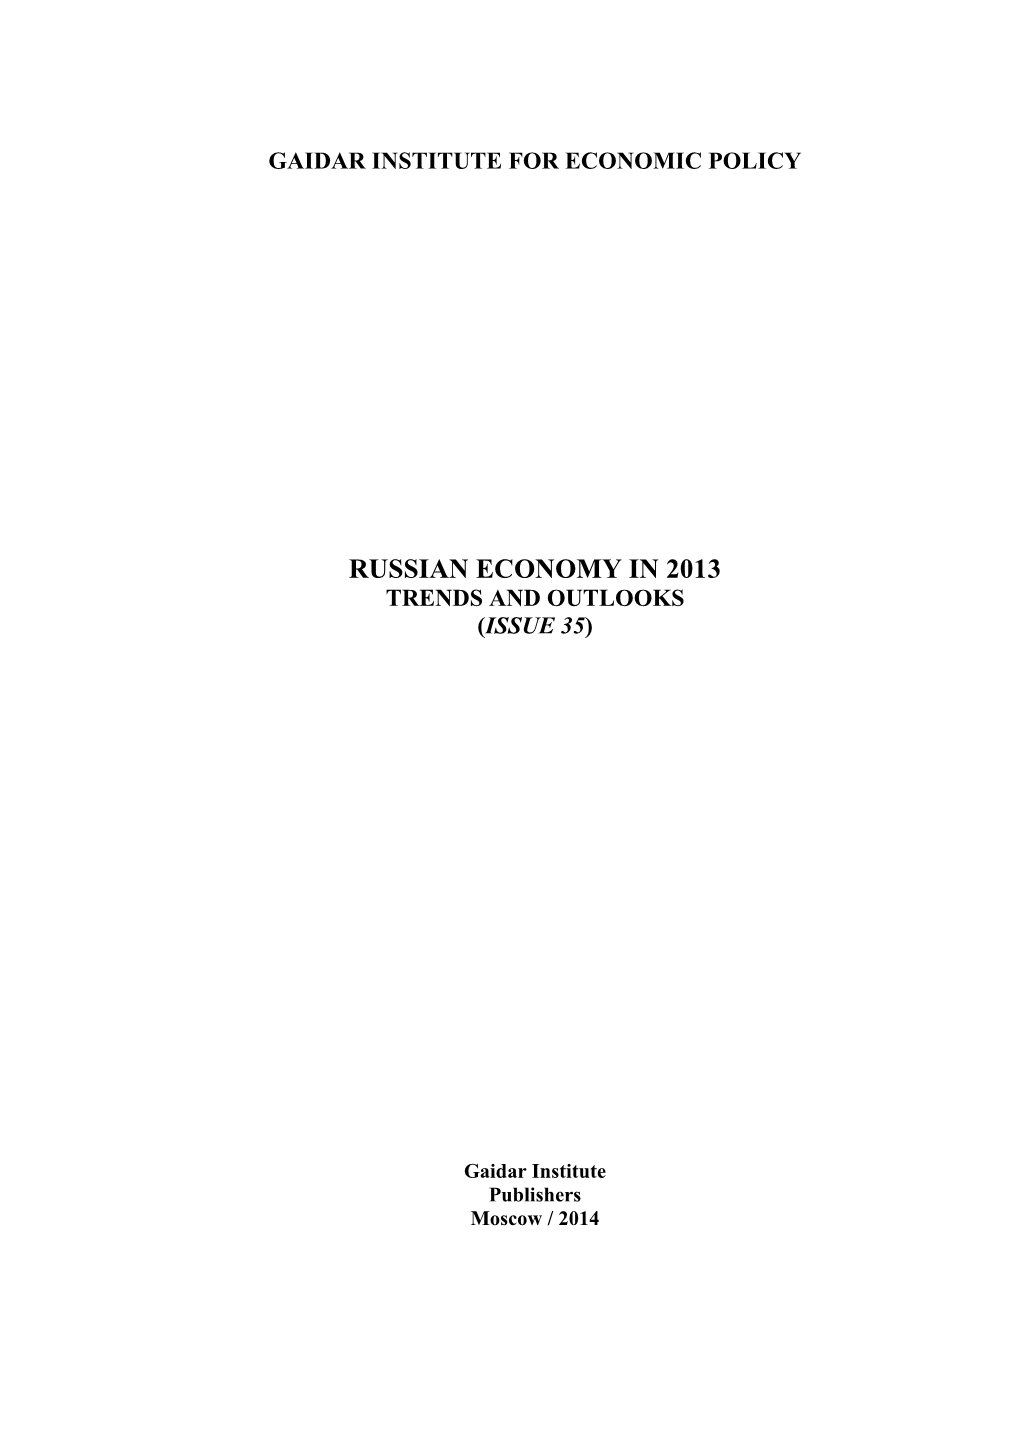 Russian Economy in 2013 Trends and Outlooks (Issue 35)